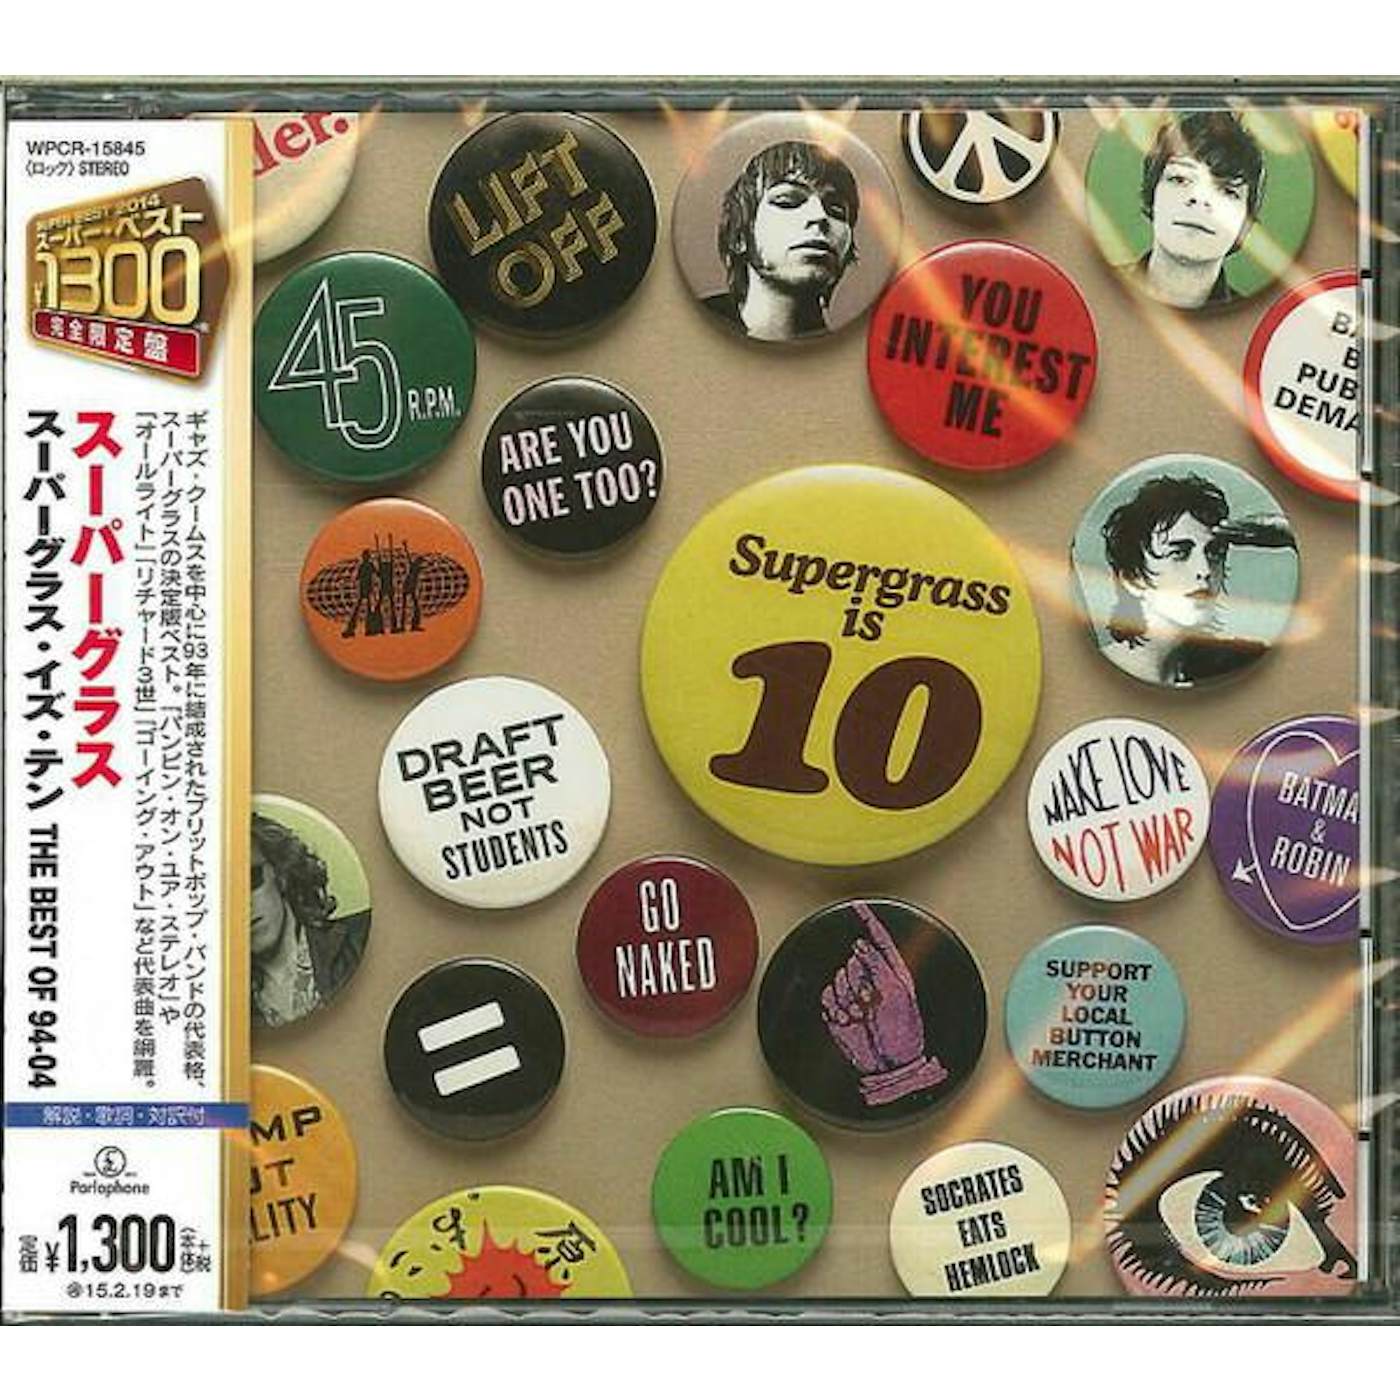 SUPERGRASS IS 10: BEST OF 1994 - 2004 CD